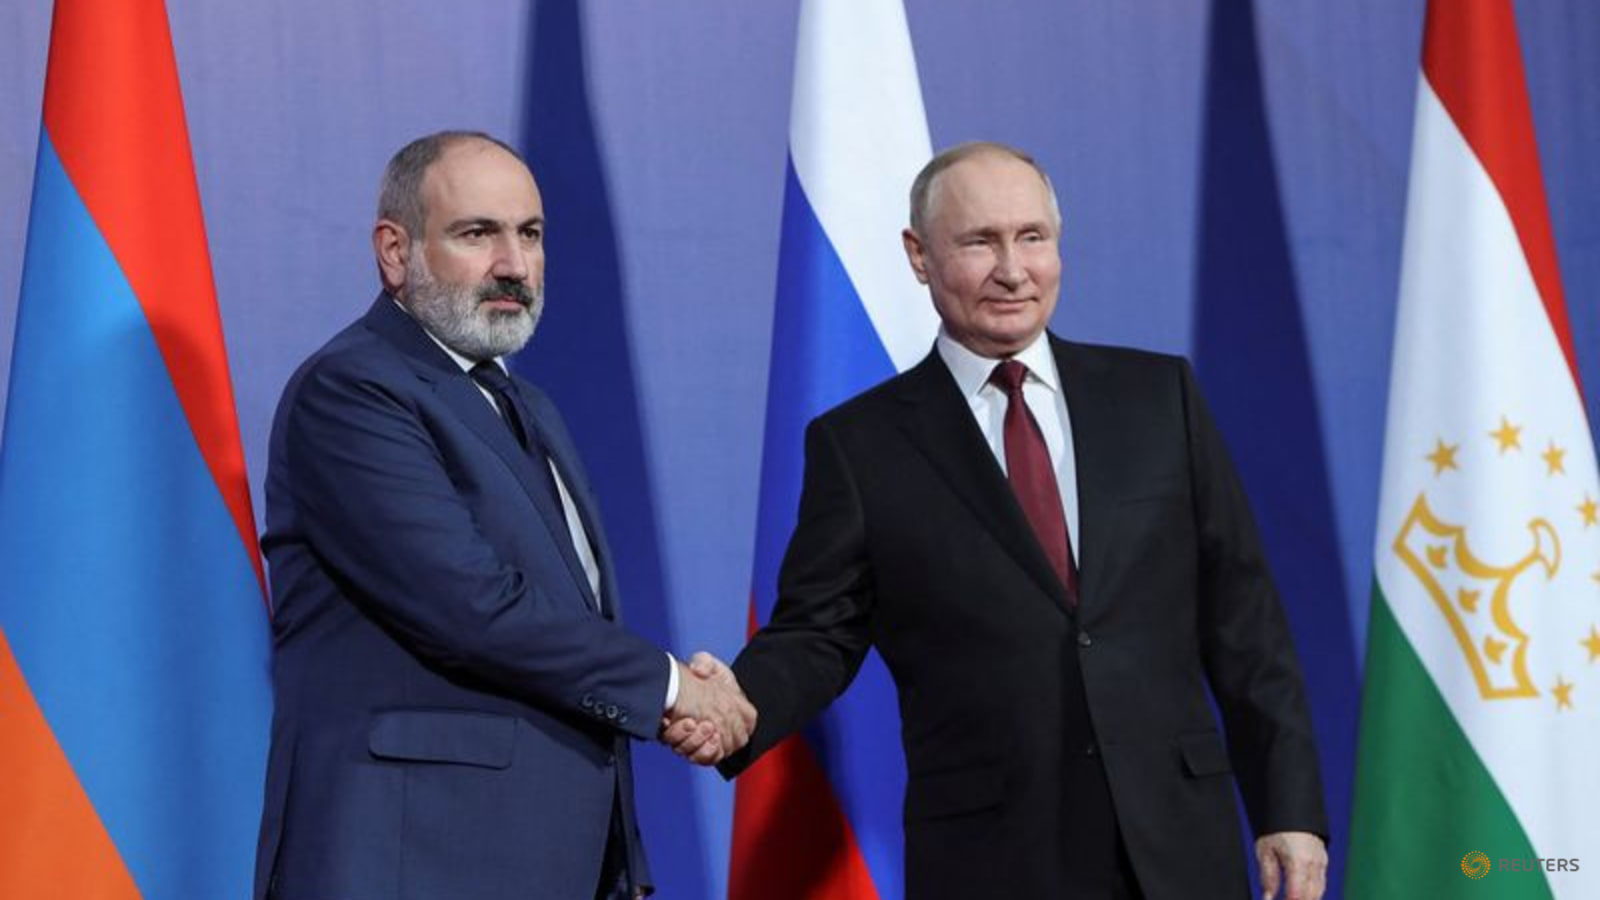 hosting-putin,-armenian-leader-complains-of-lack-of-help-from-russian-led-alliance